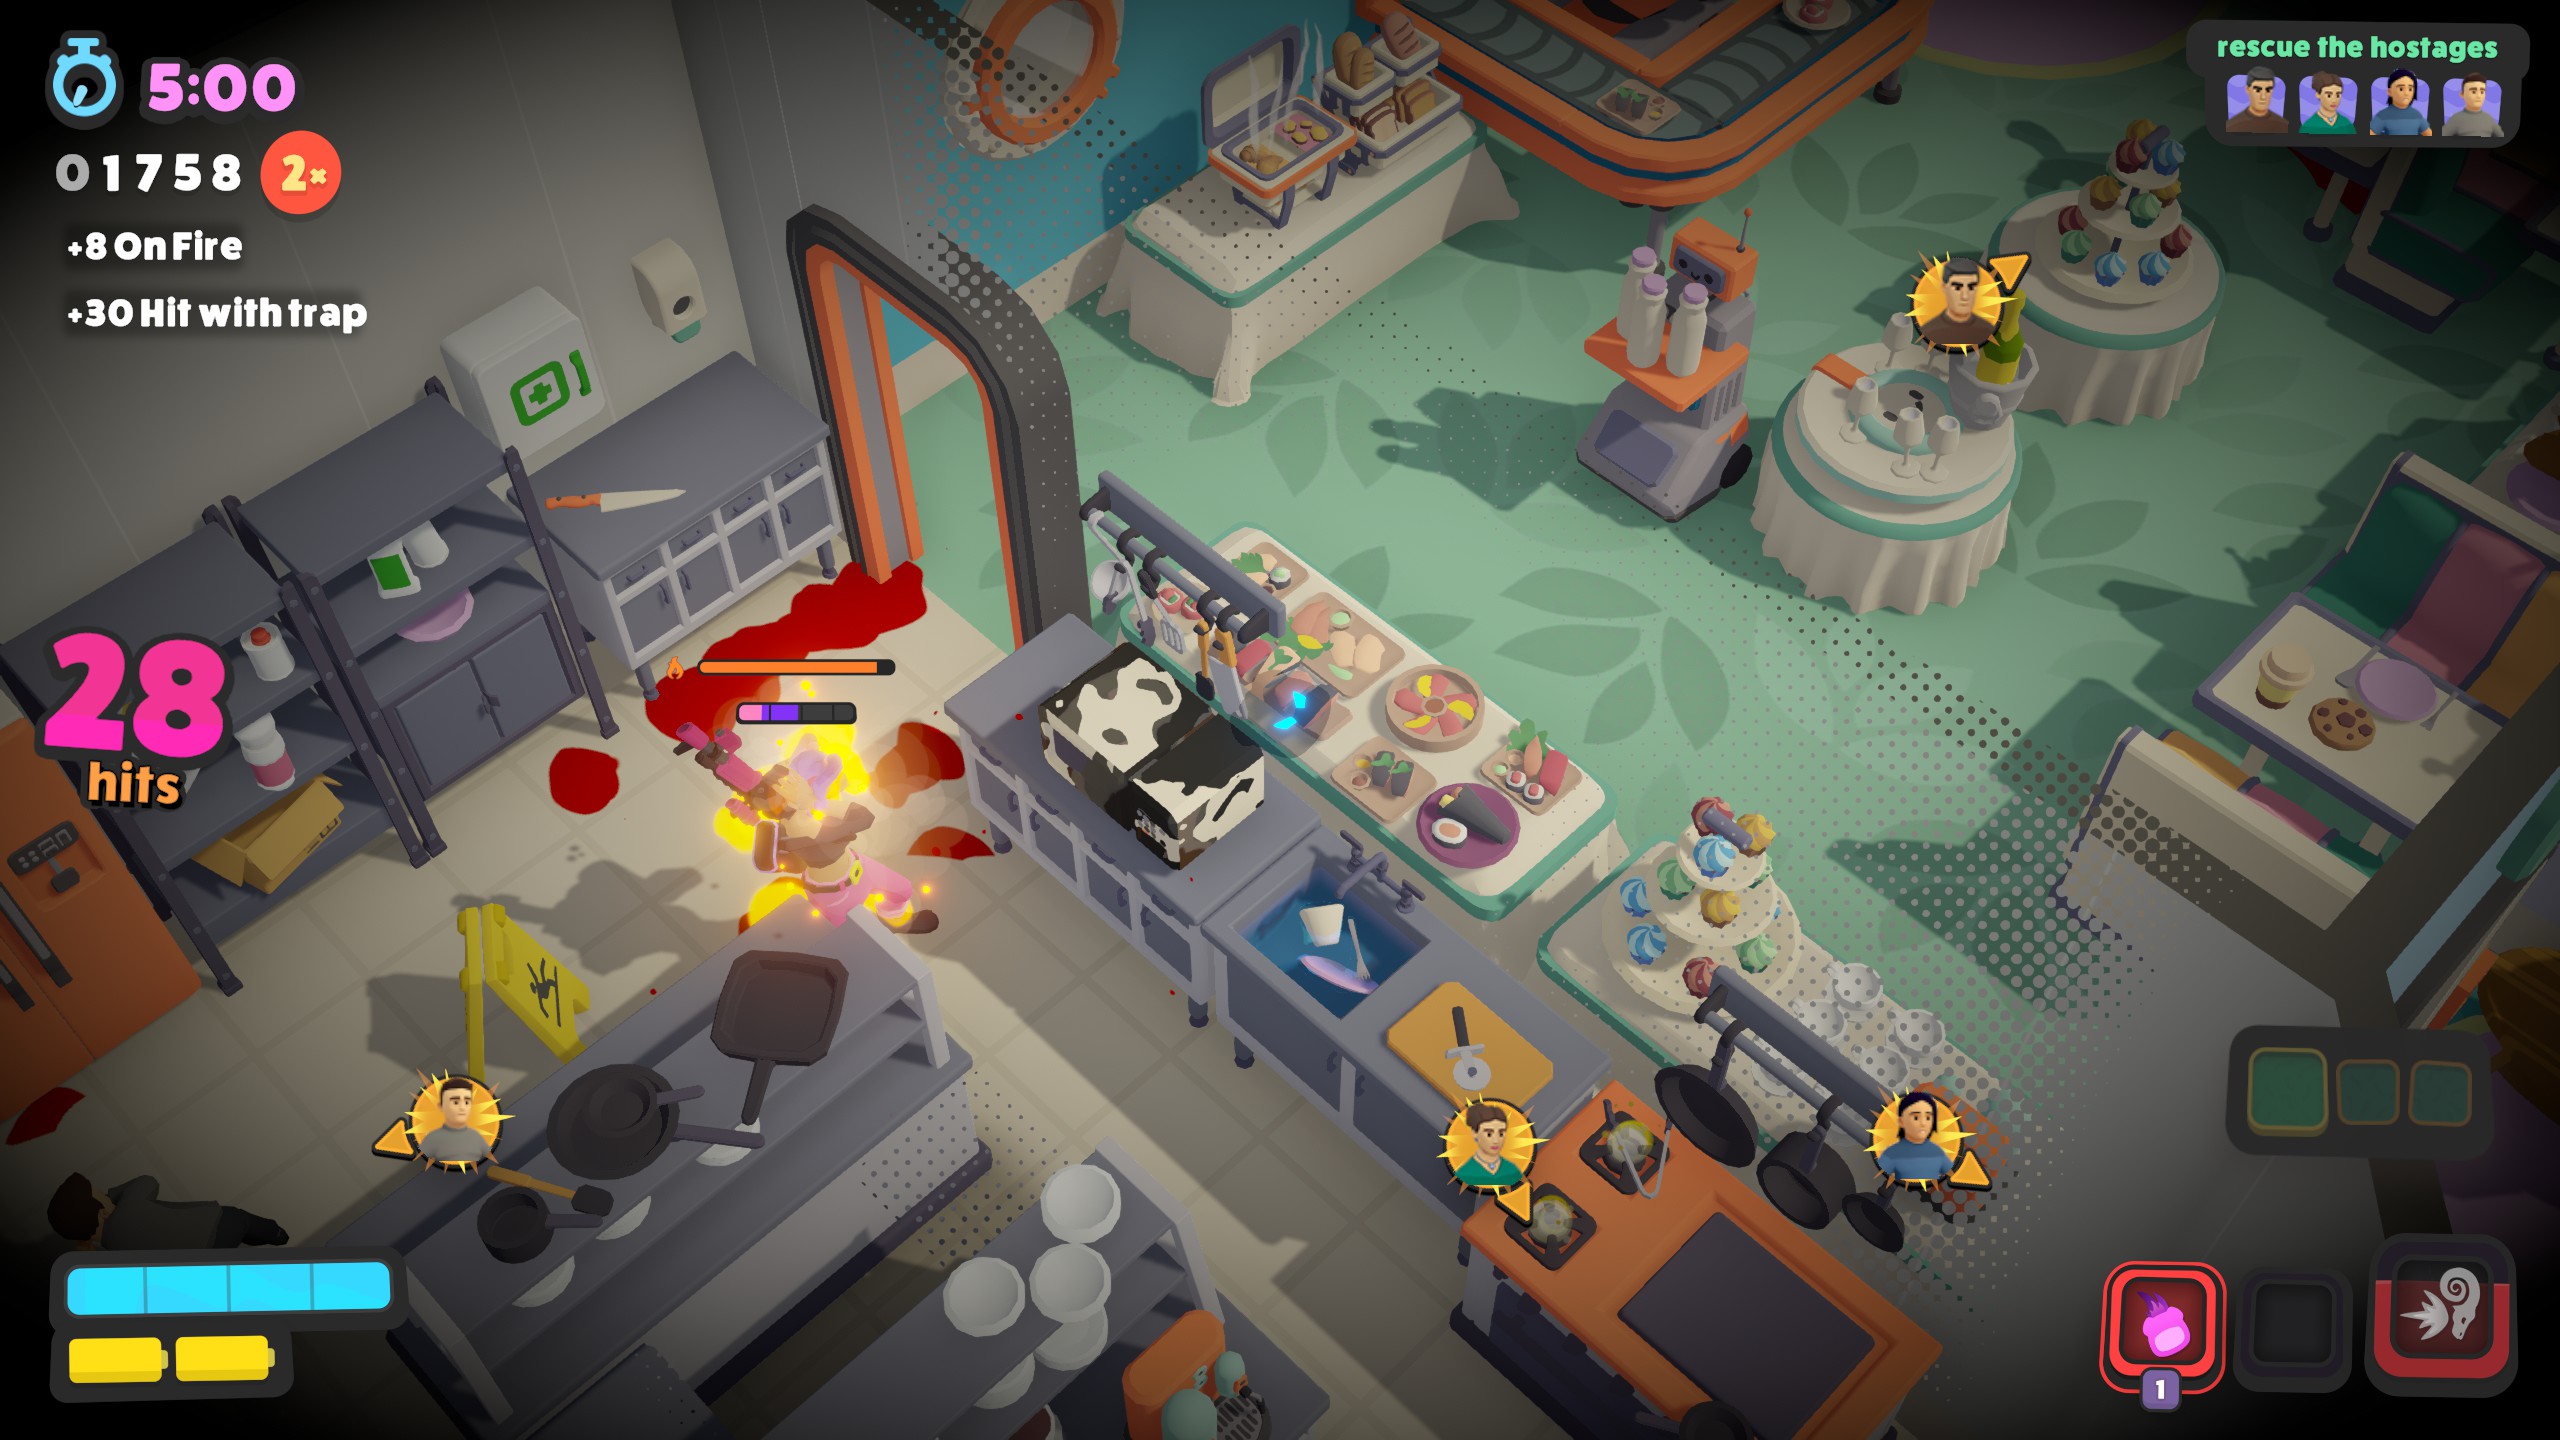 This stealth game challenges you to do murders, then vacuum up the mess